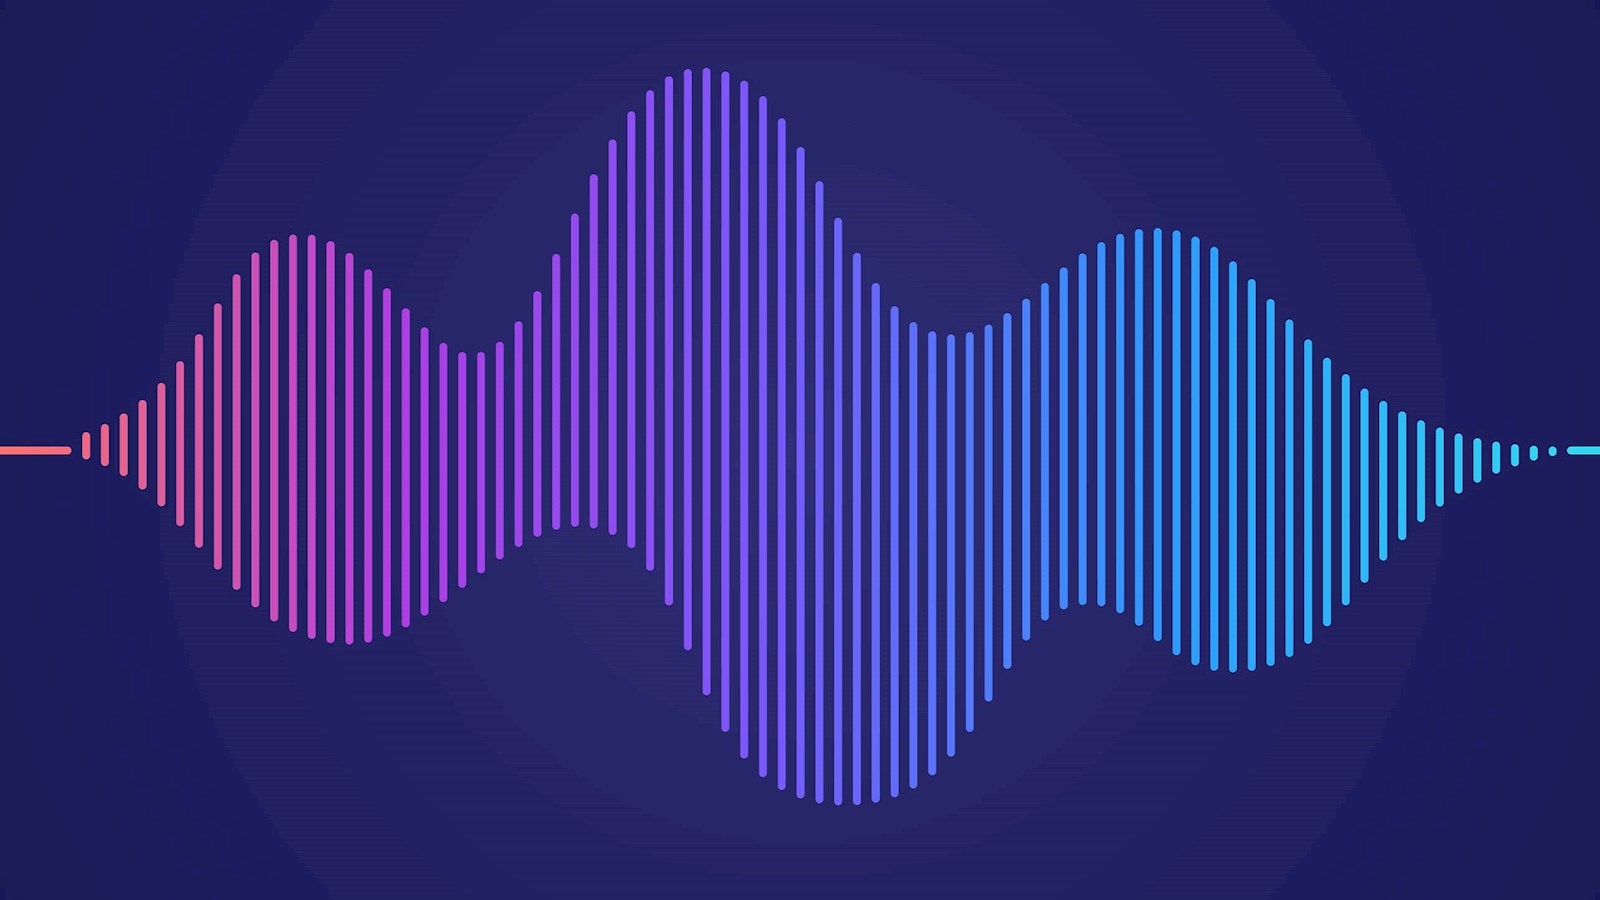 Sound wave graphic with a pink to turquoise gradient